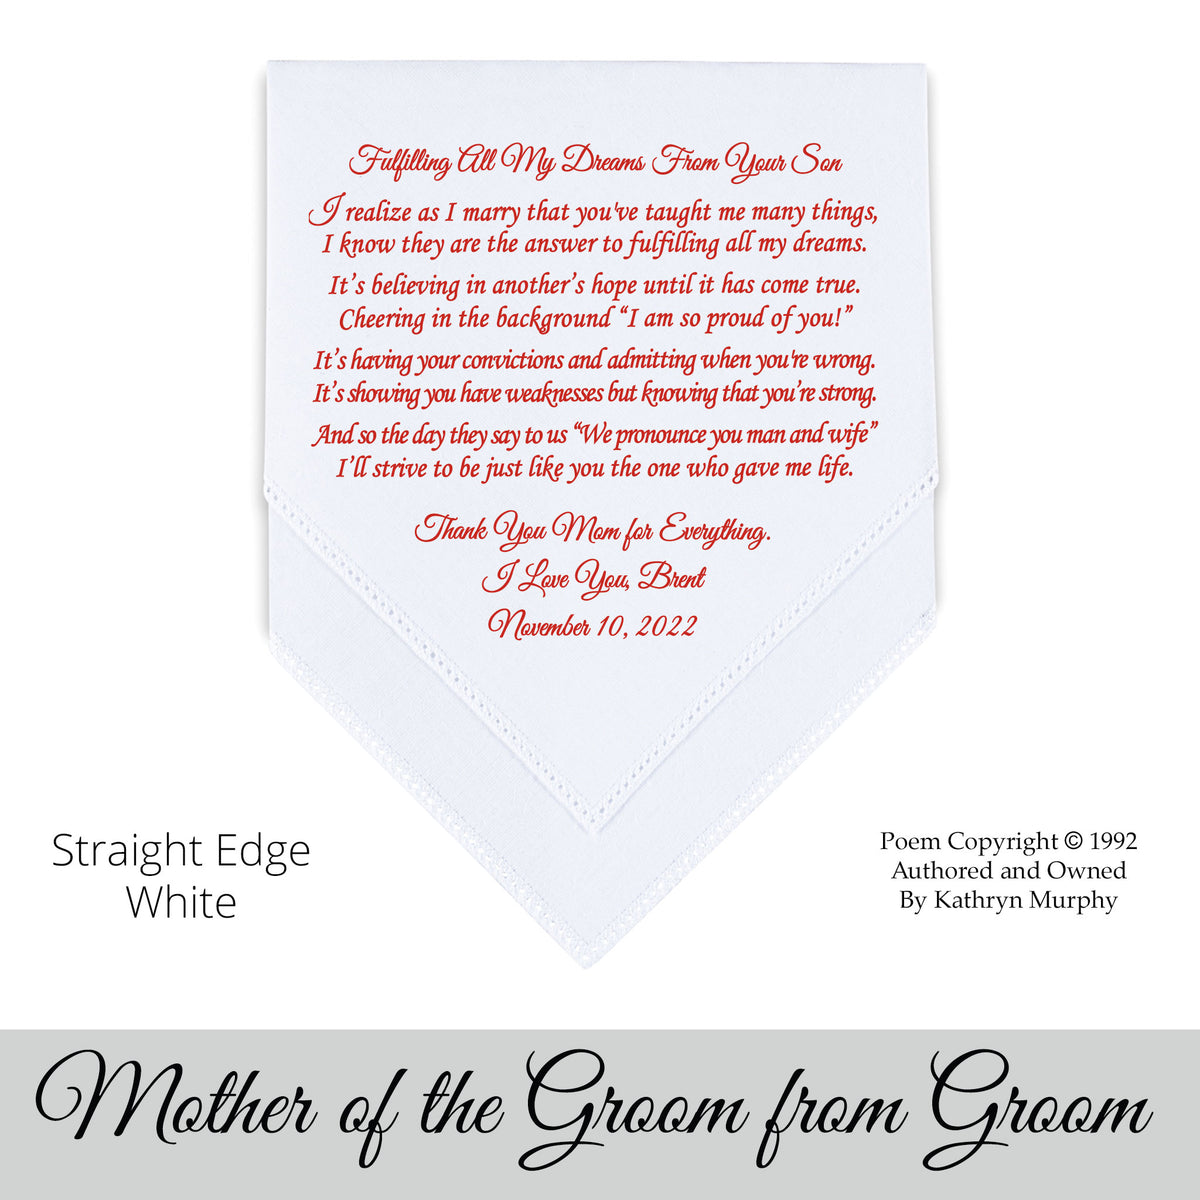 gift for the mother of the groom Wedding Hankie with printed poem from the groom